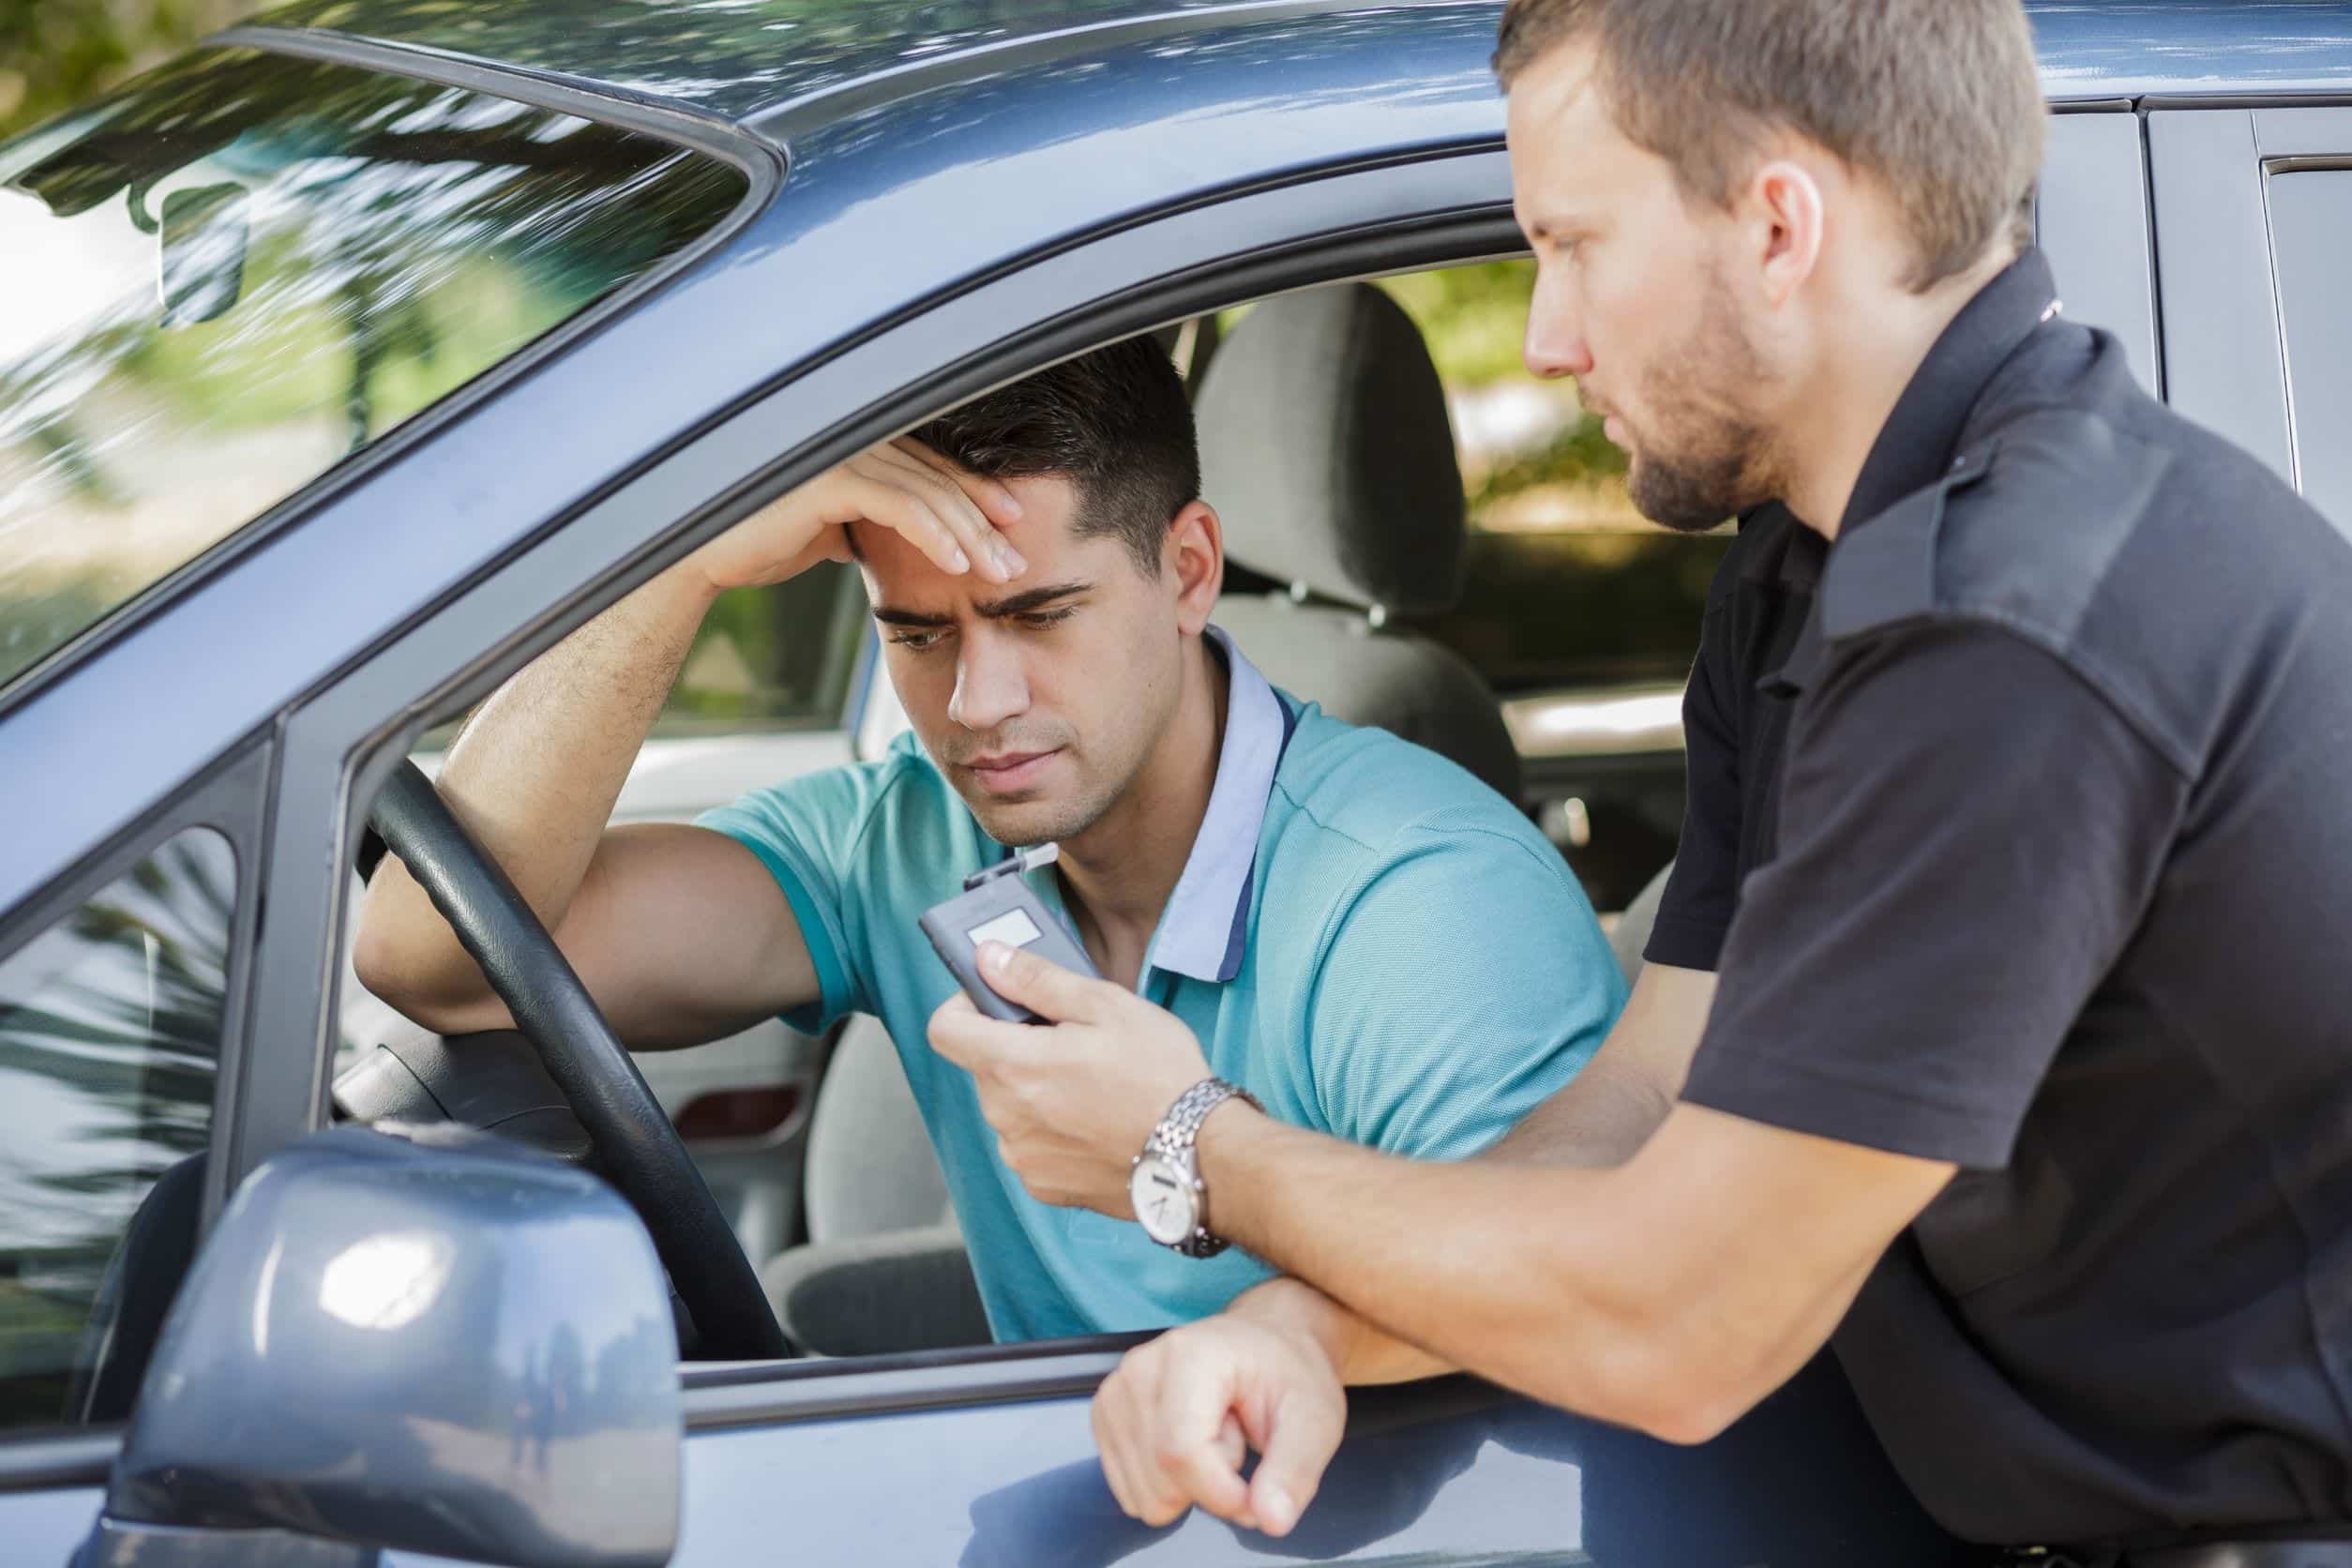 Illinois Breath Tests Aren't Always Right - Ways to Fight Your DUI